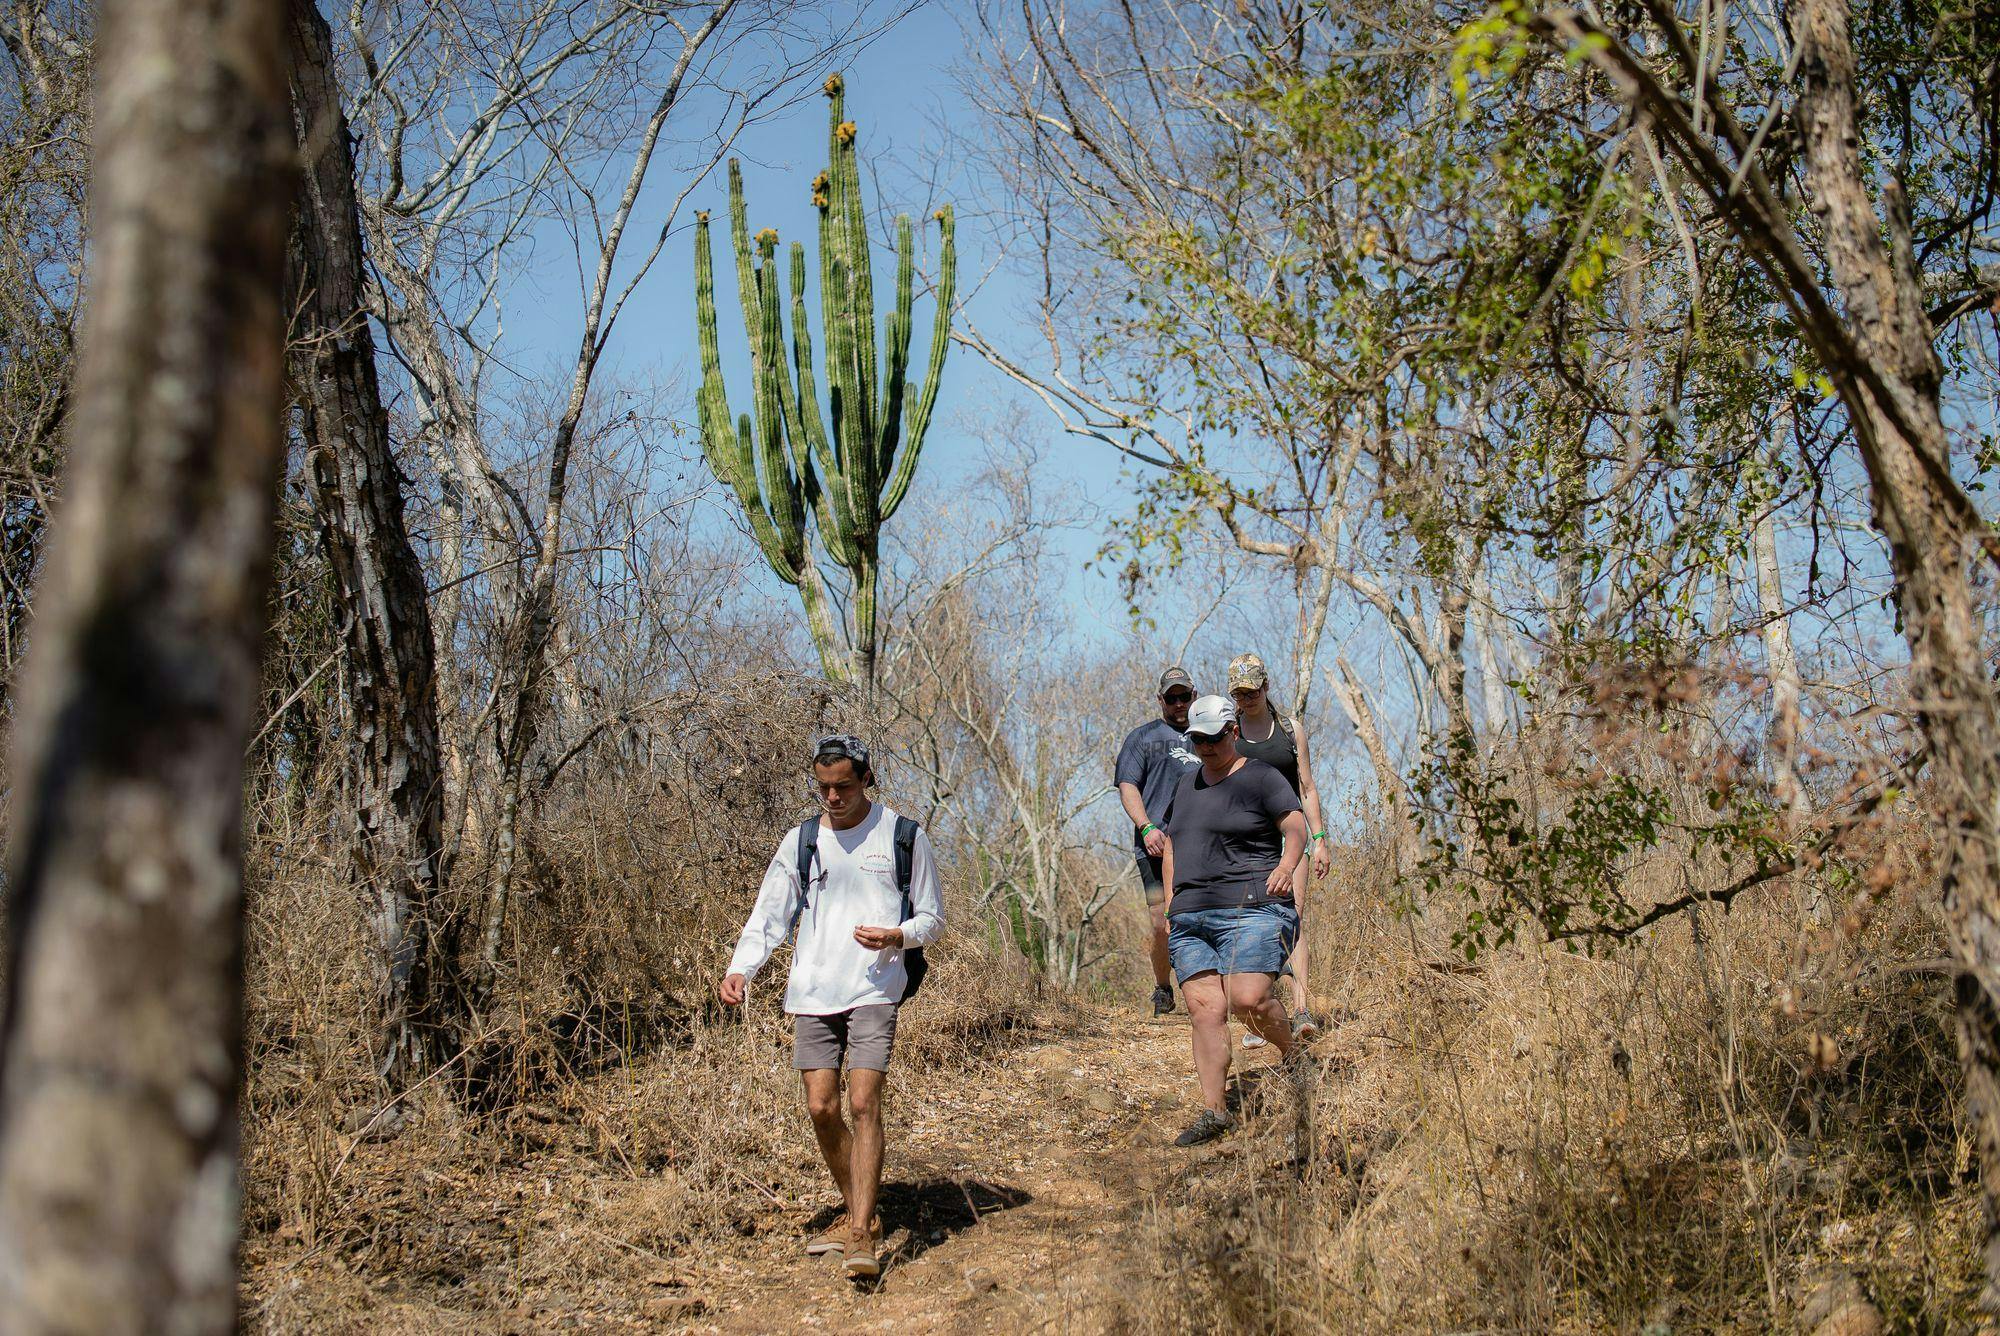 Hiking the Blue Agave Trail & Tequila Tasting